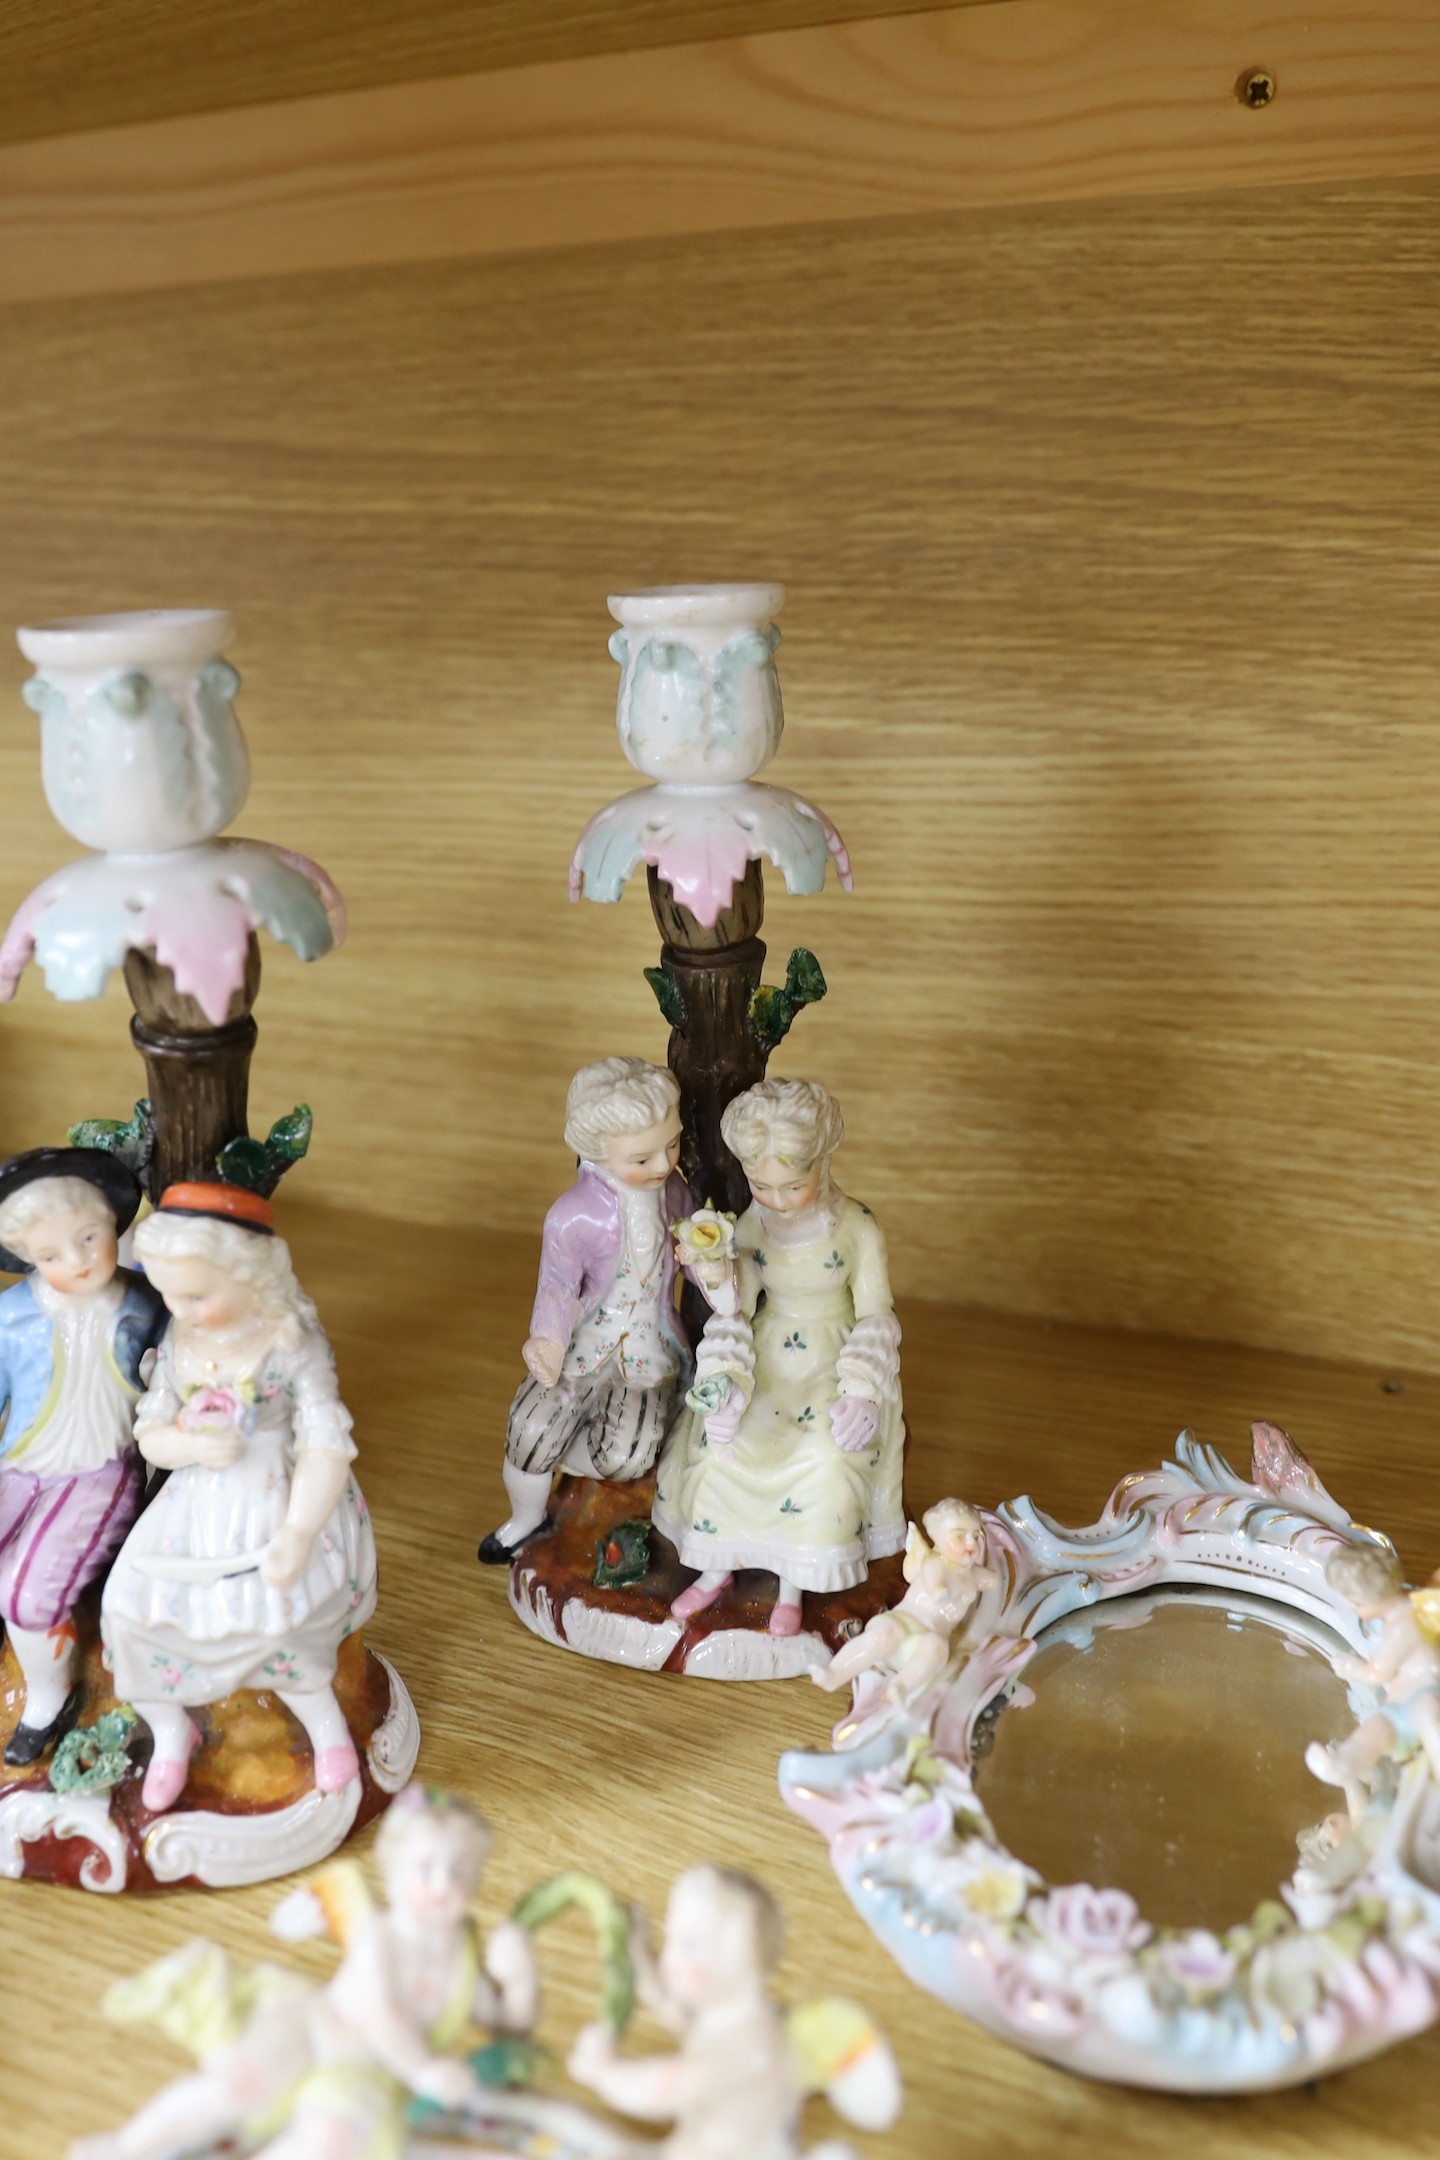 A pair of 19th century continental porcelain figural candlesticks and a group of four similar frames